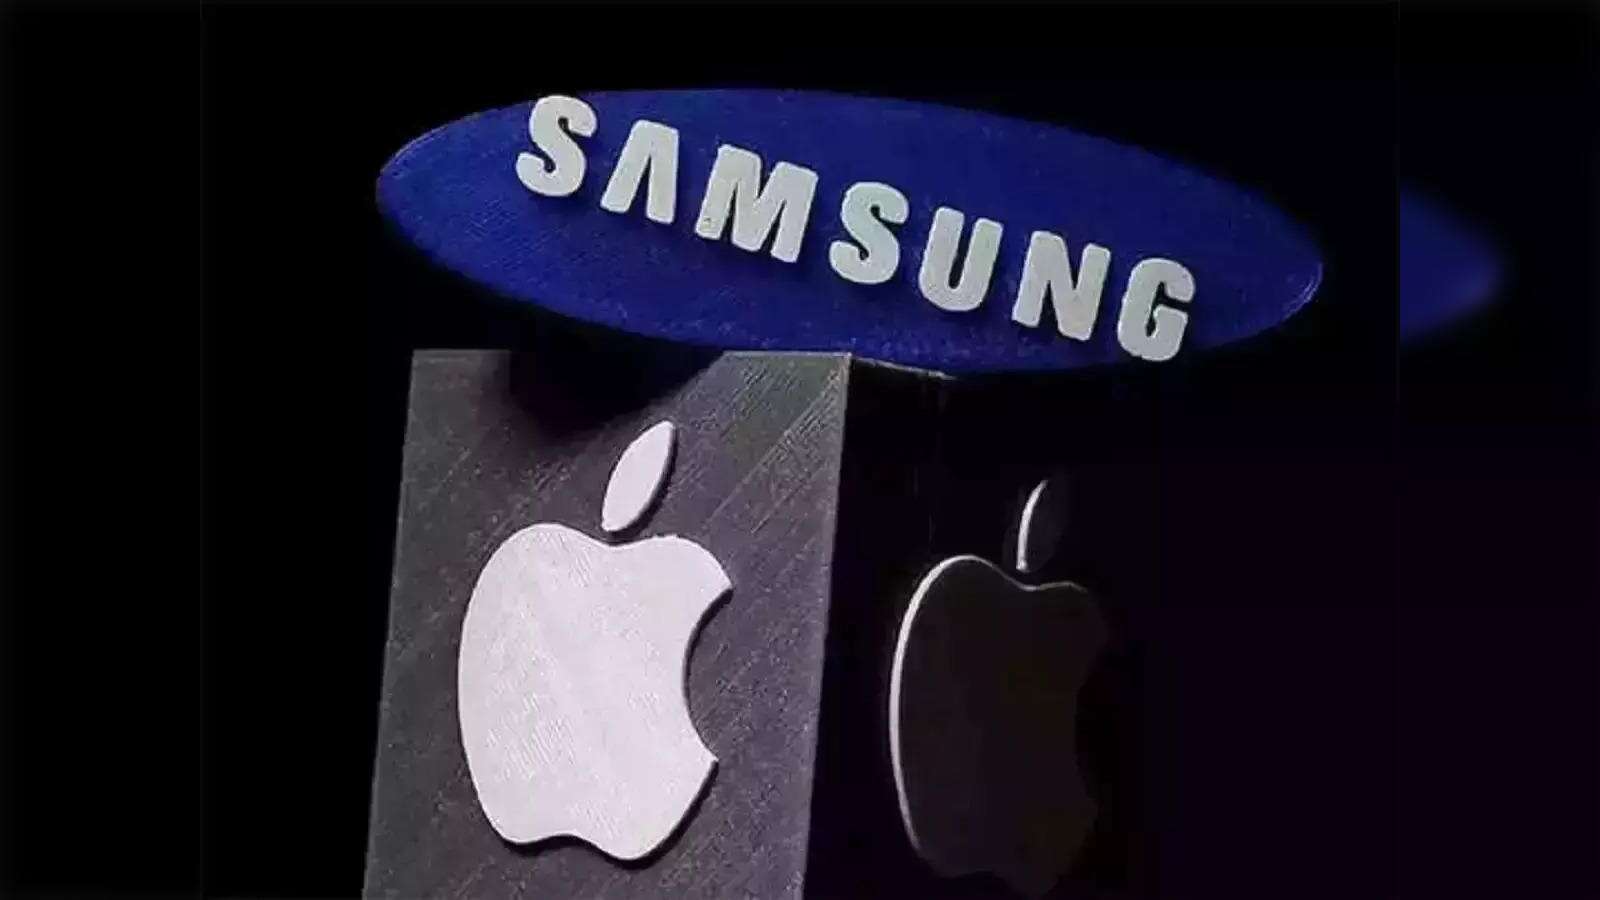 Apple lost its top position to Samsung as iPhone sales decreased